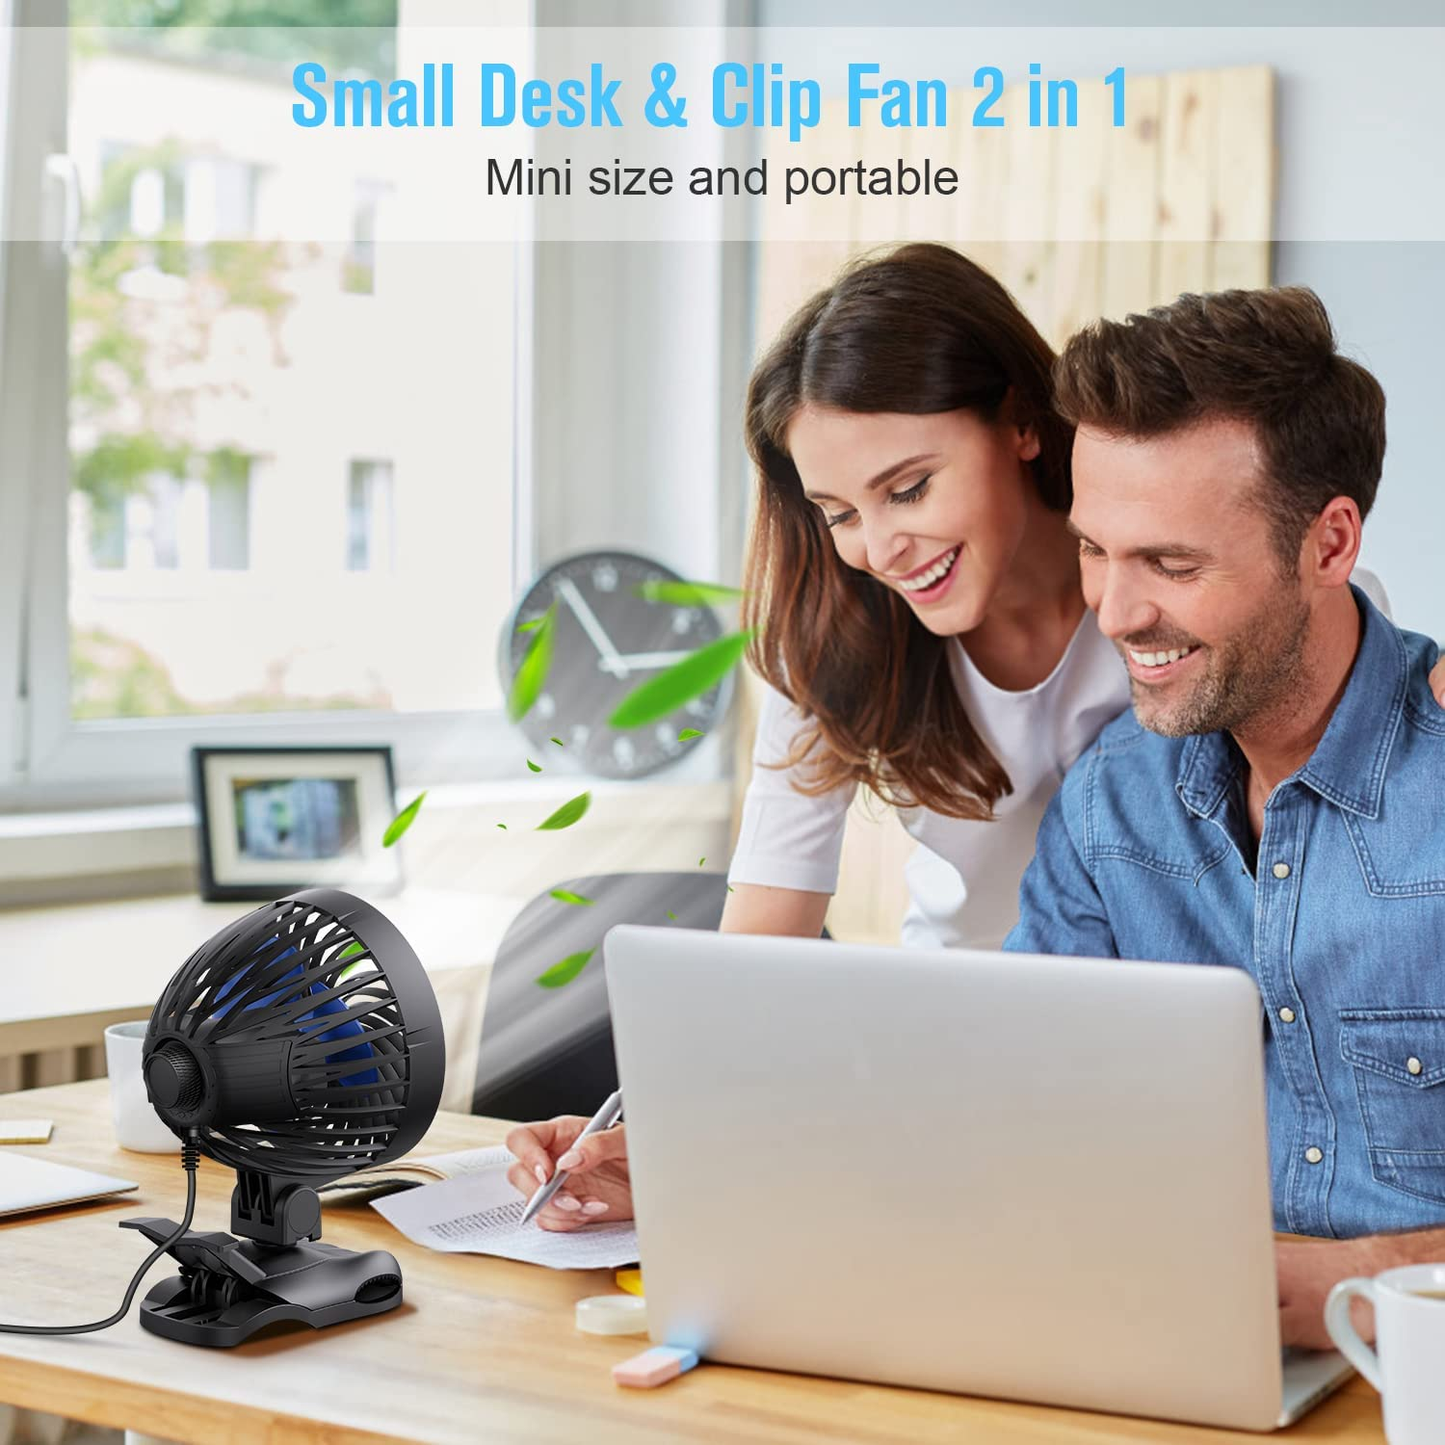 Portable Clip on Fan - 6 Inch Personal USB Fan with CVT Speeds, Adjustable Tilt, Quiet Operation Small Cooling Fan for Office Desk Dorm Bed Stroller -Supercar Clamp